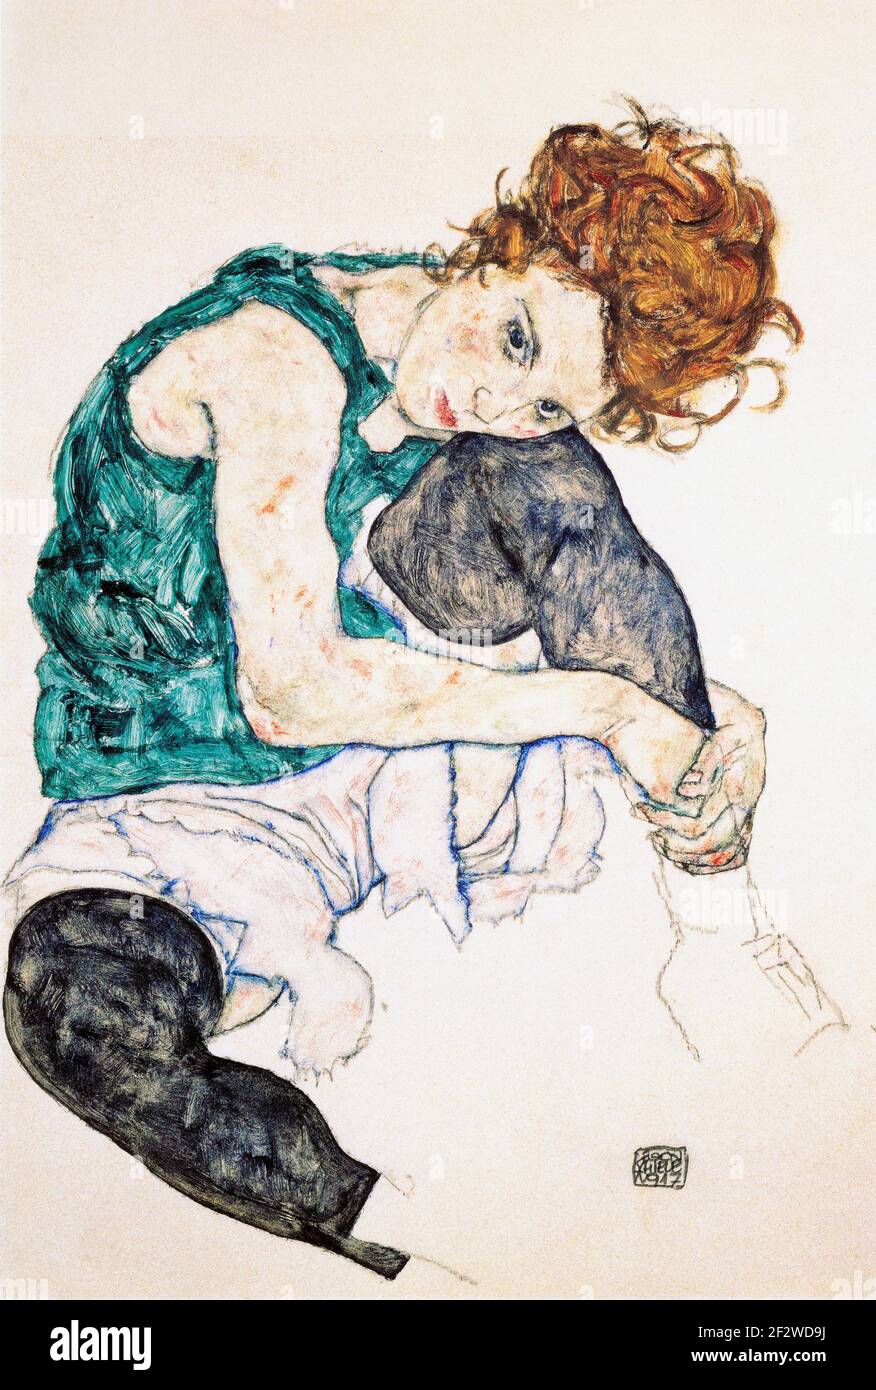 Schiele. Painting entitled “Seated Woman with Bent Knees” by Egon Schiele, gouache on paper, 1917 Stock Photo